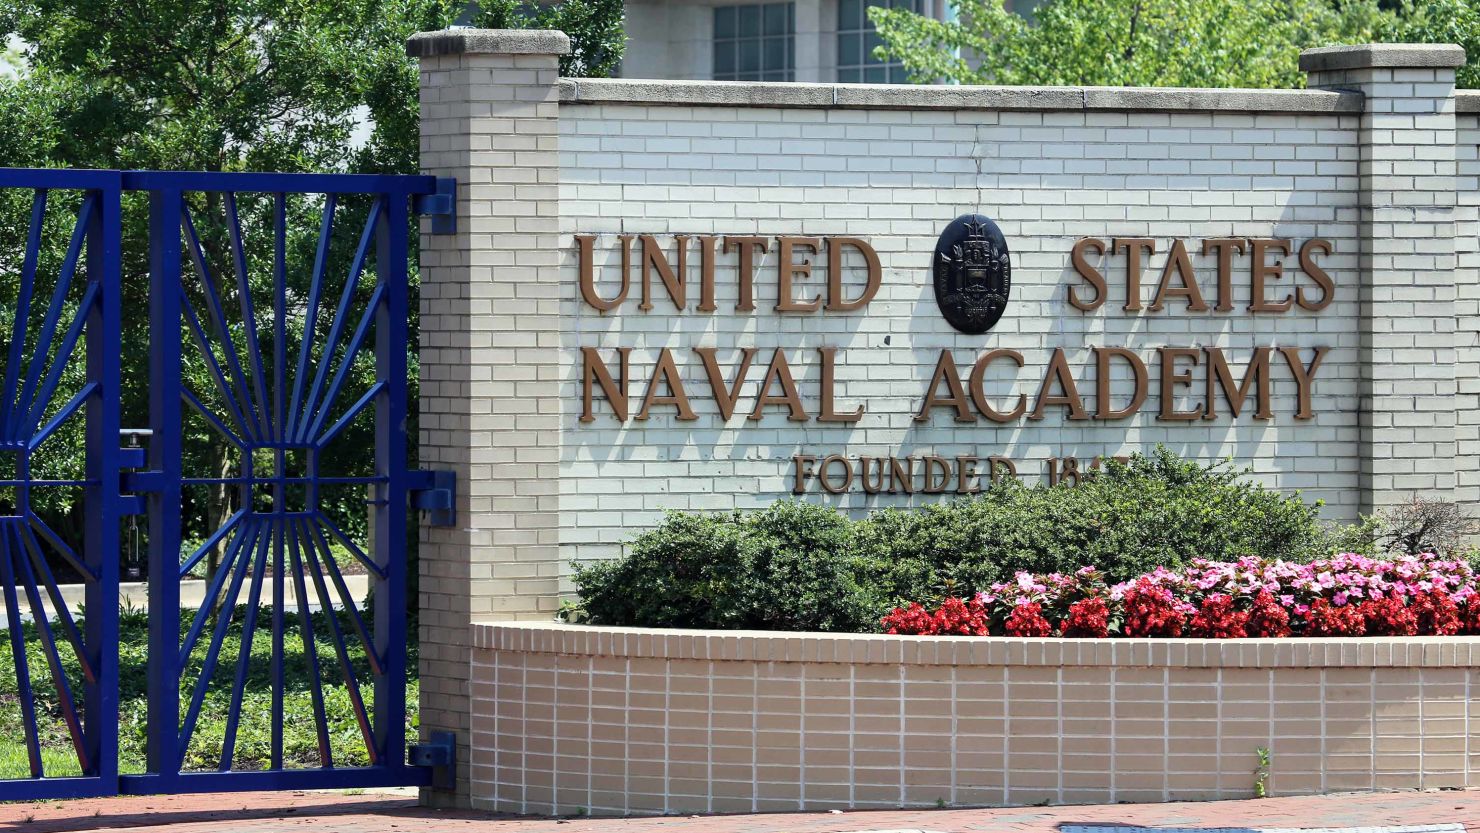 The United States Naval Academy in Annapolis, Maryland.